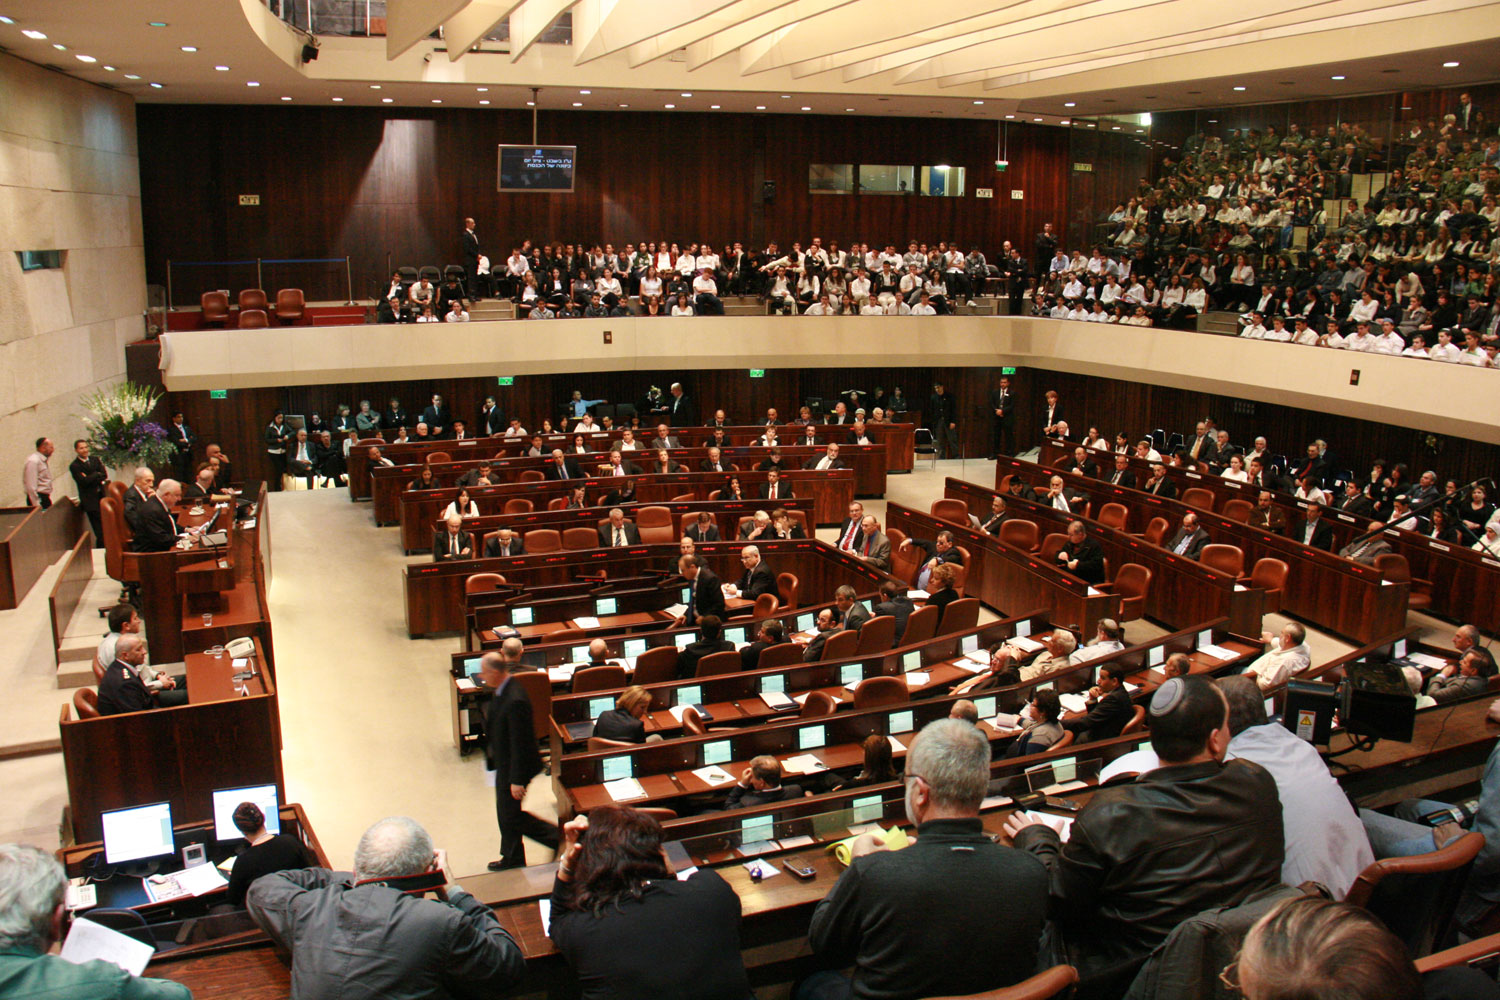 The 2013 Knesset has already proposed dozens of discriminatory bills in its first few months.